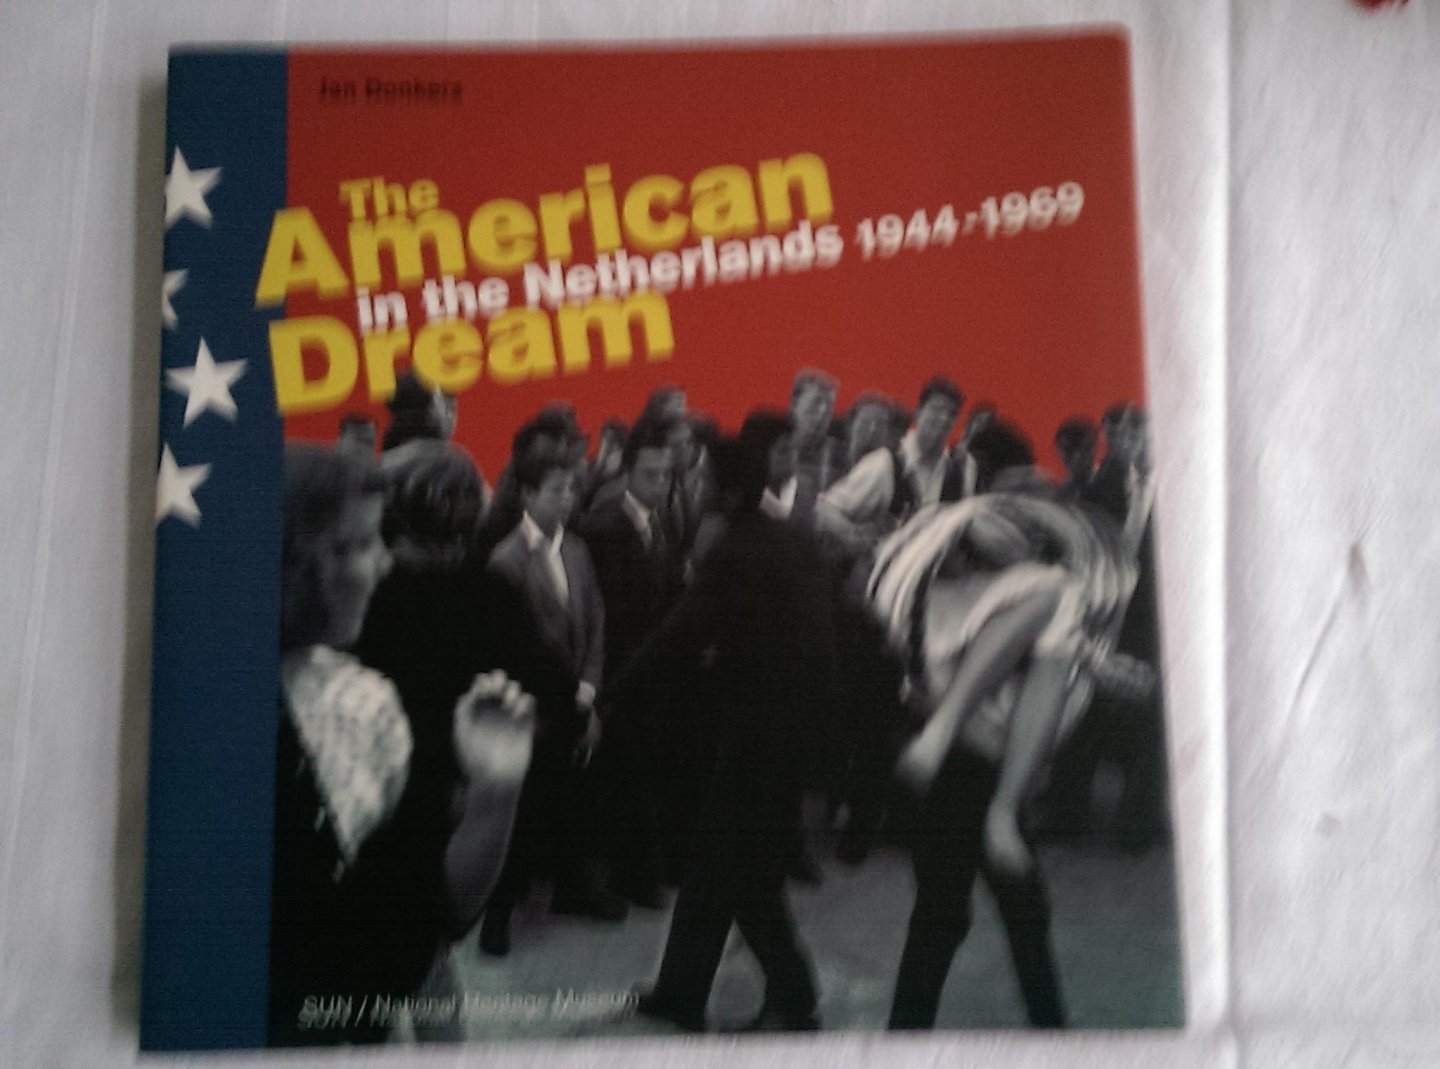 Donkers, Jan - The American Dream in the Netherlands 1944-1969